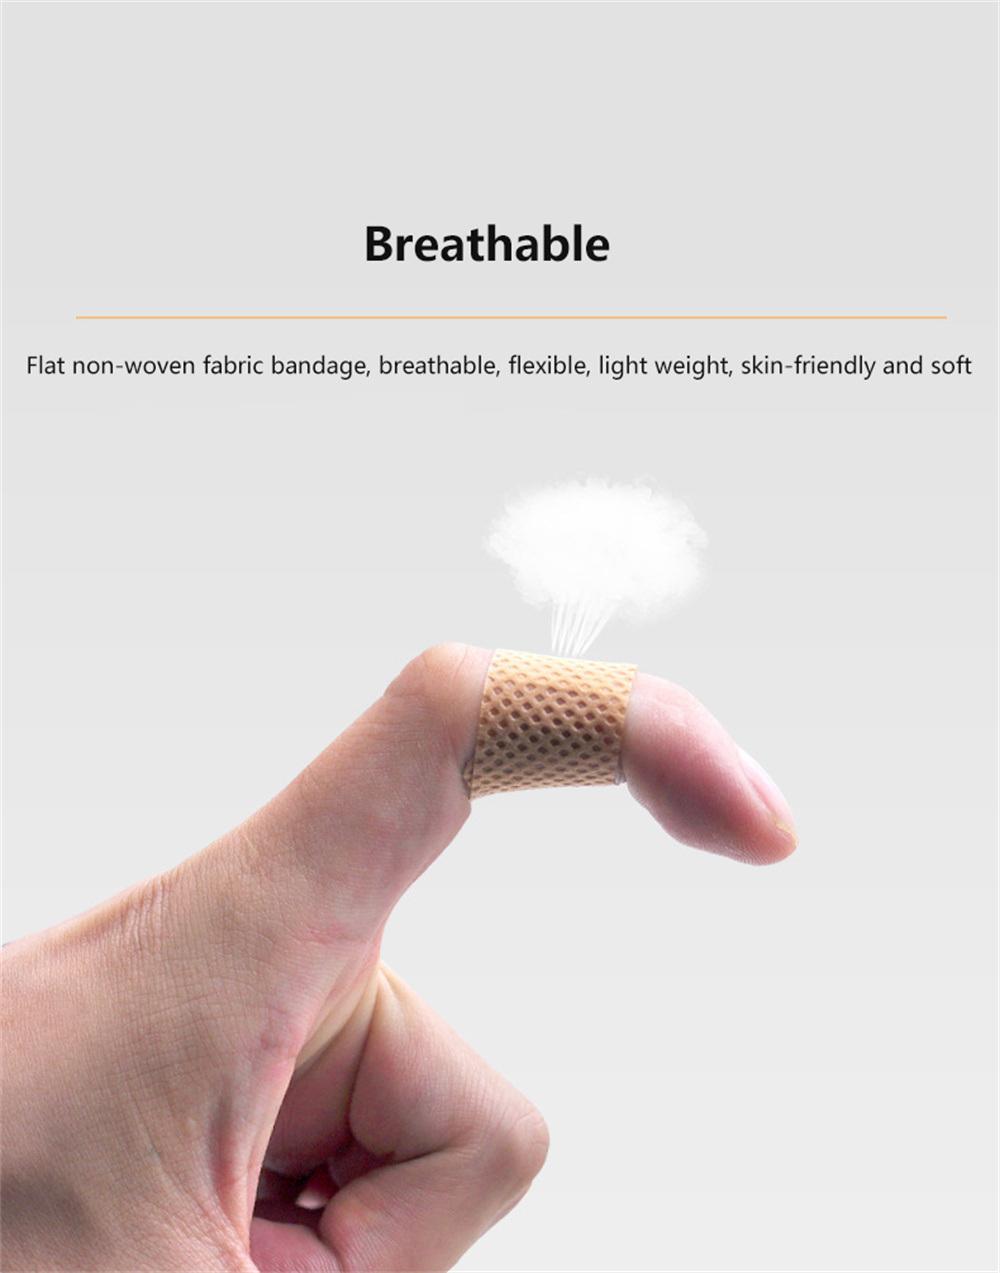 Sterile Adhesive Bandage Band-Aid Ultra Waterproof Wound Plaster